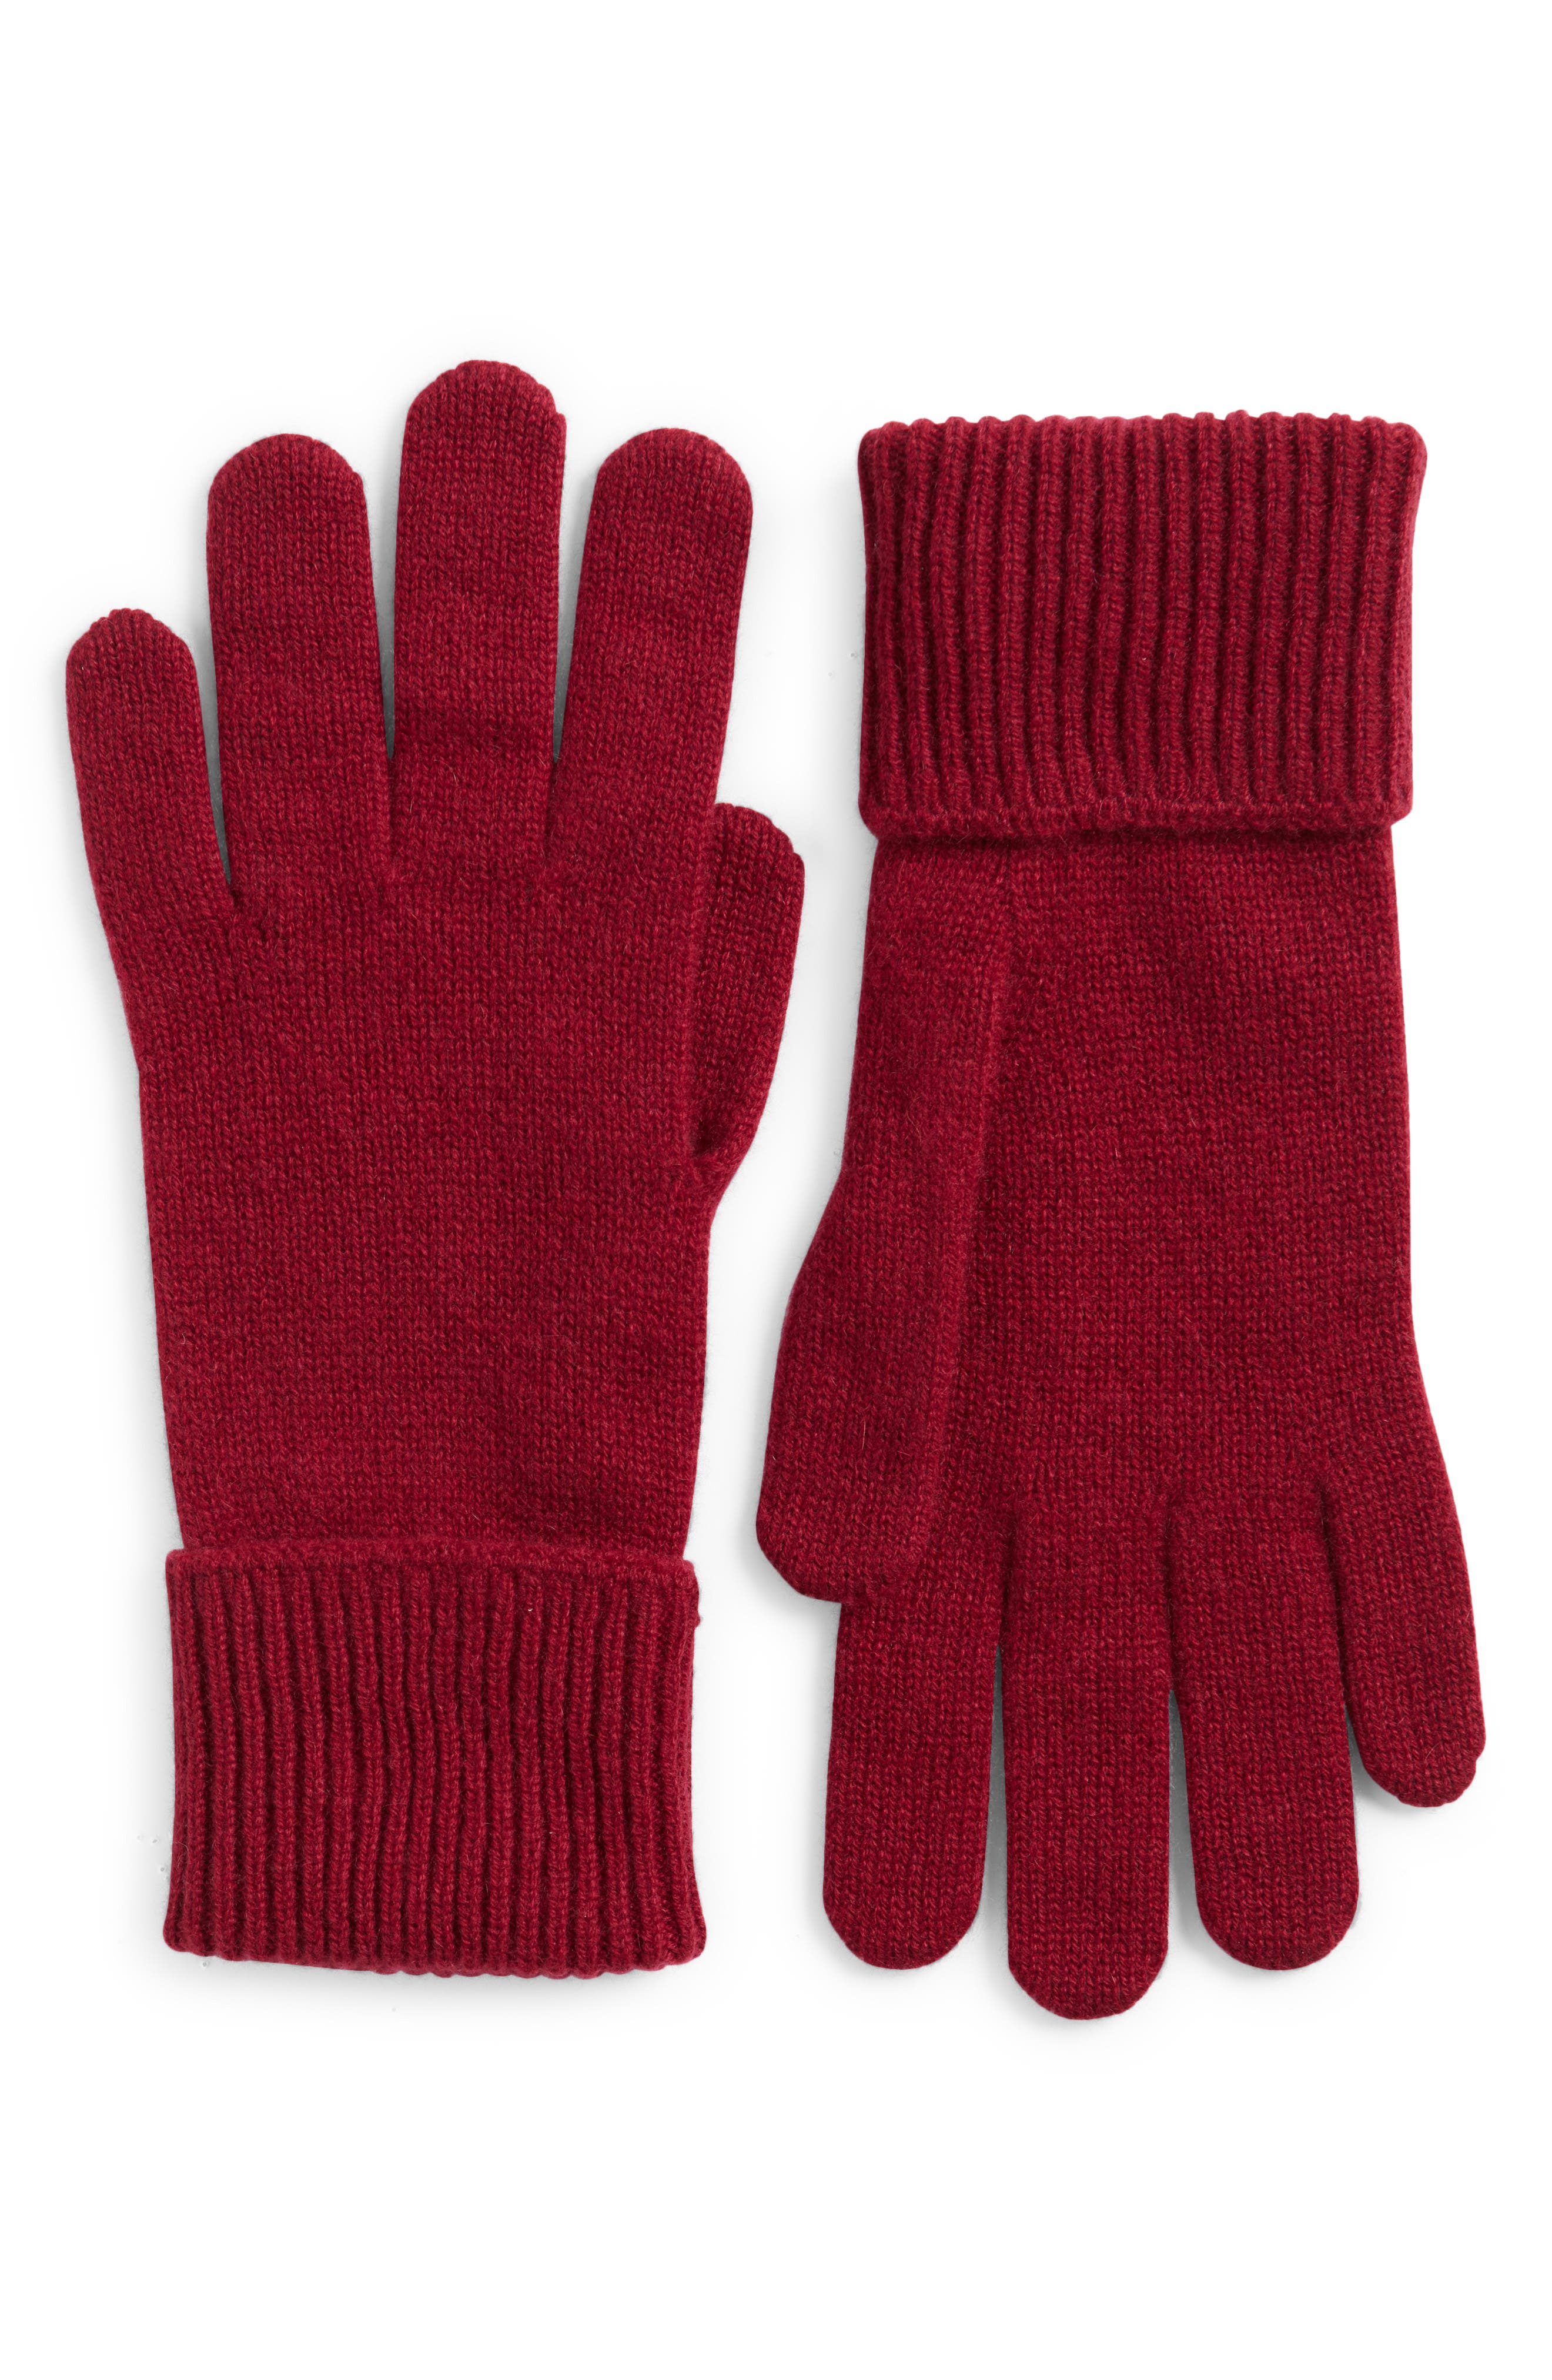 Burberry argyle wool mittens - Red